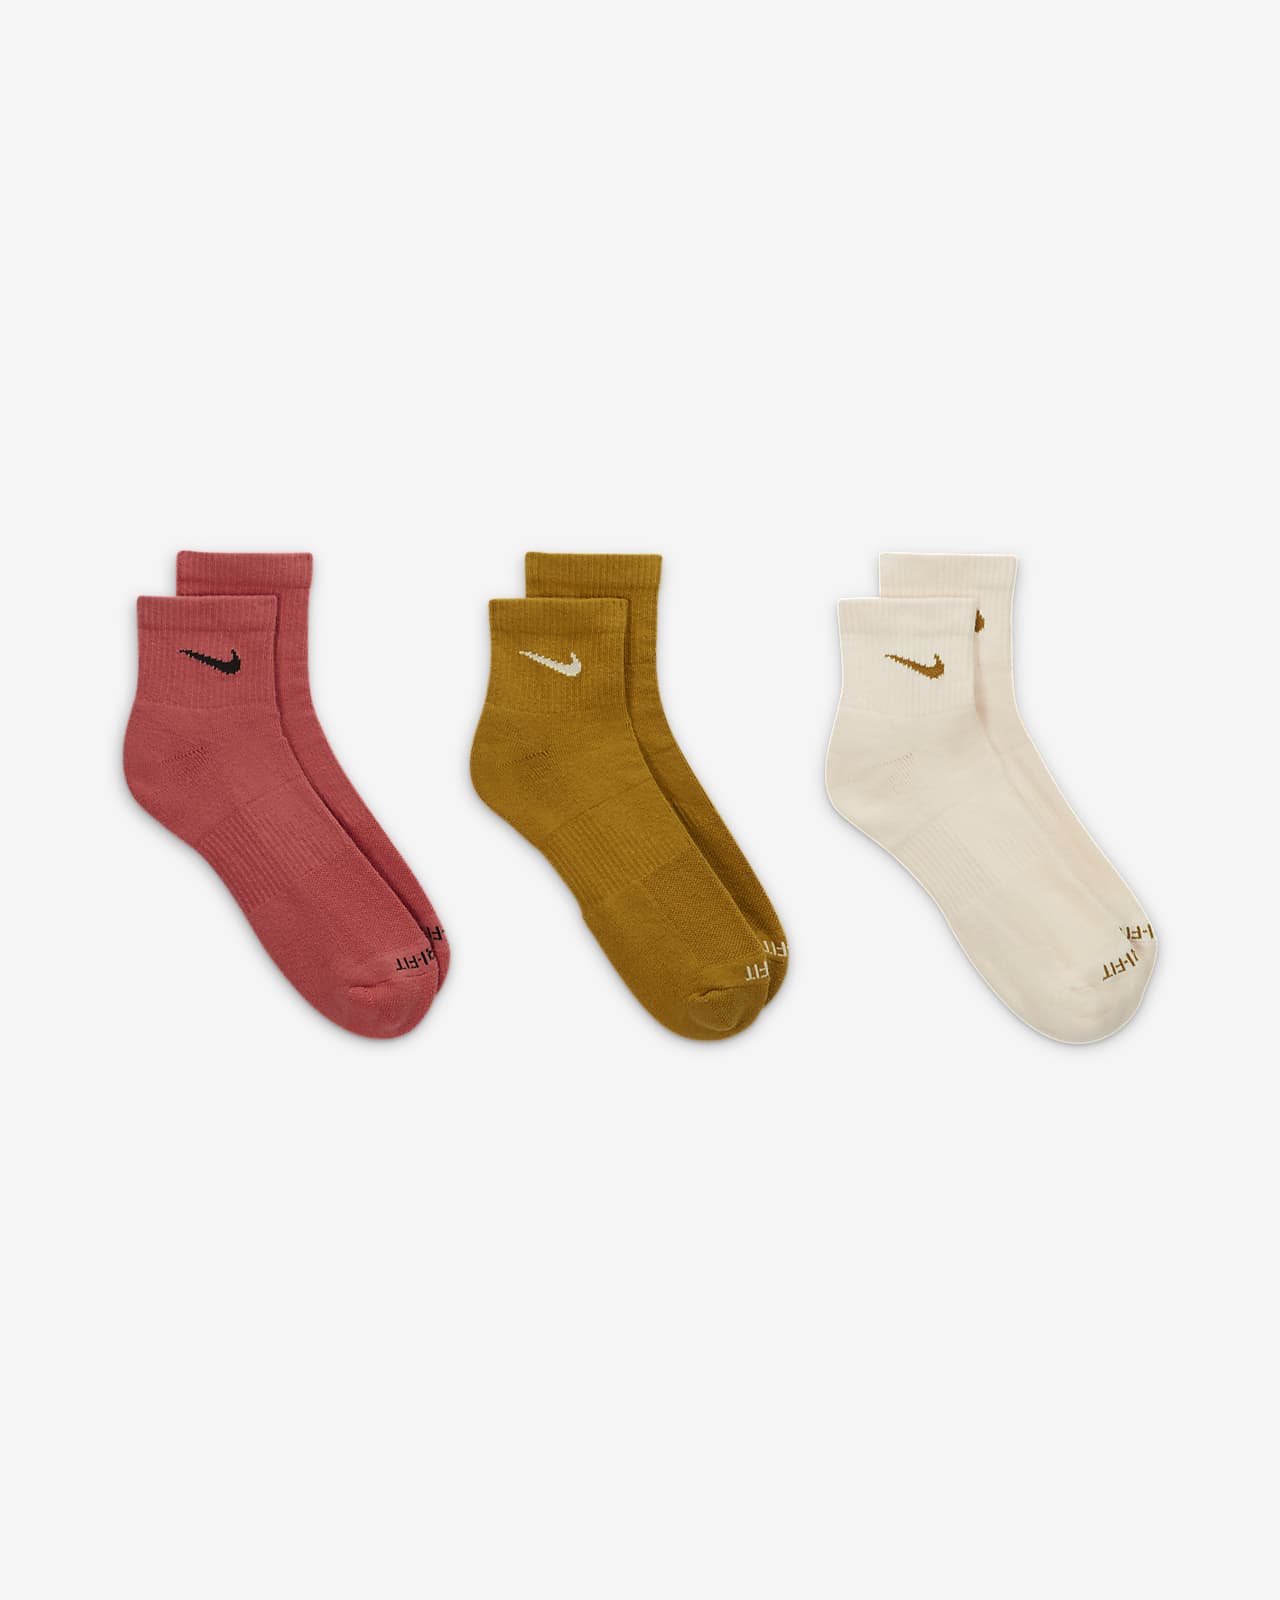 Chaussettes de training Nike Everyday Plus Cushioned (3 paires)